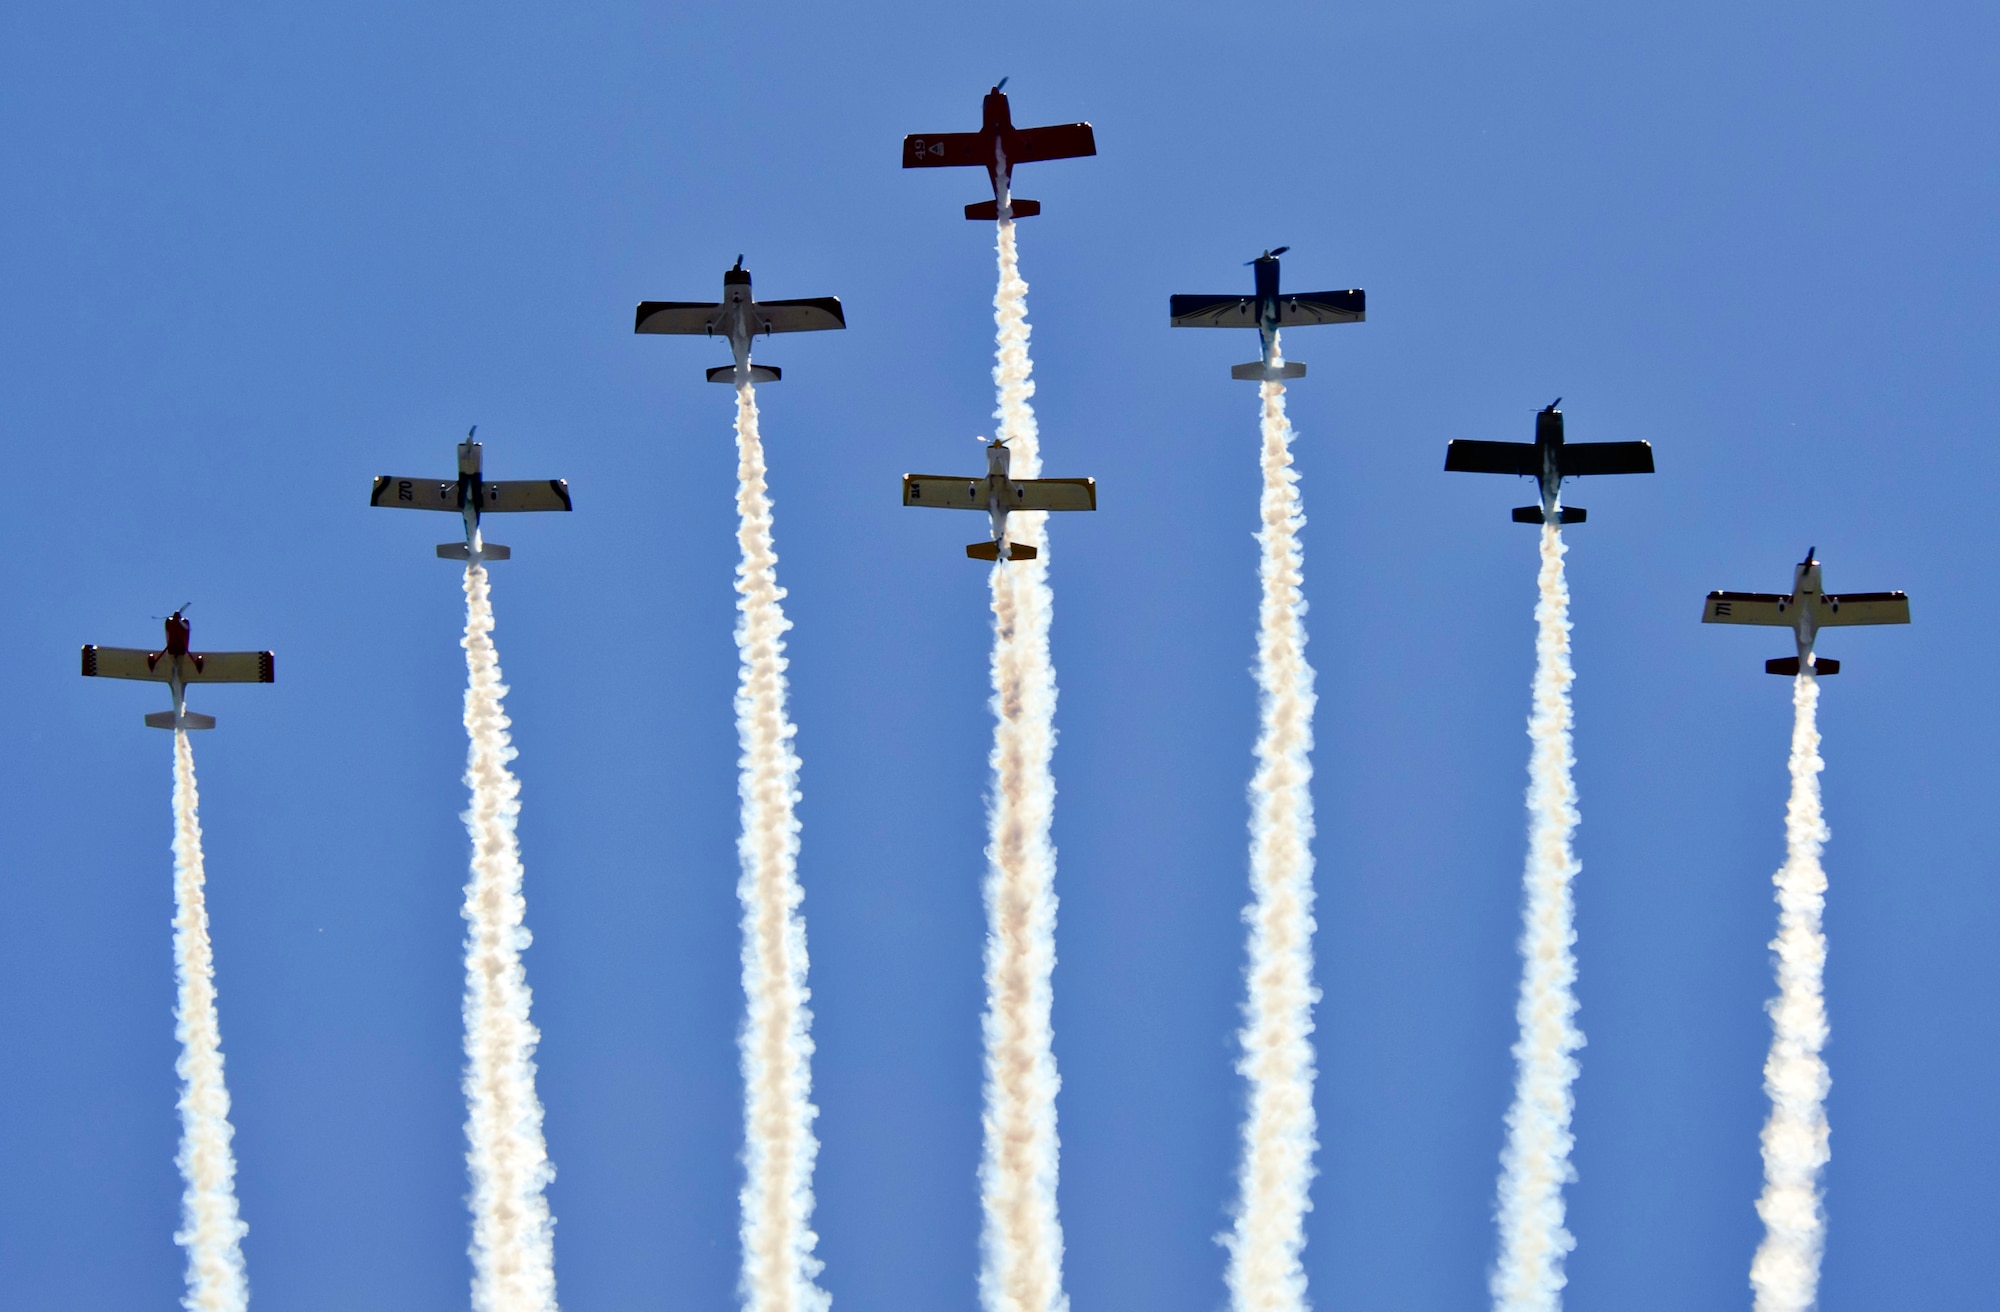 The Lightning Formation Airshows team, a fast-paced precision formation demonstration team, performs aerial stunts July 13, 2019 at the “Mission Over Malmstrom” open house event on Malmstrom Air Force Base, Mont.